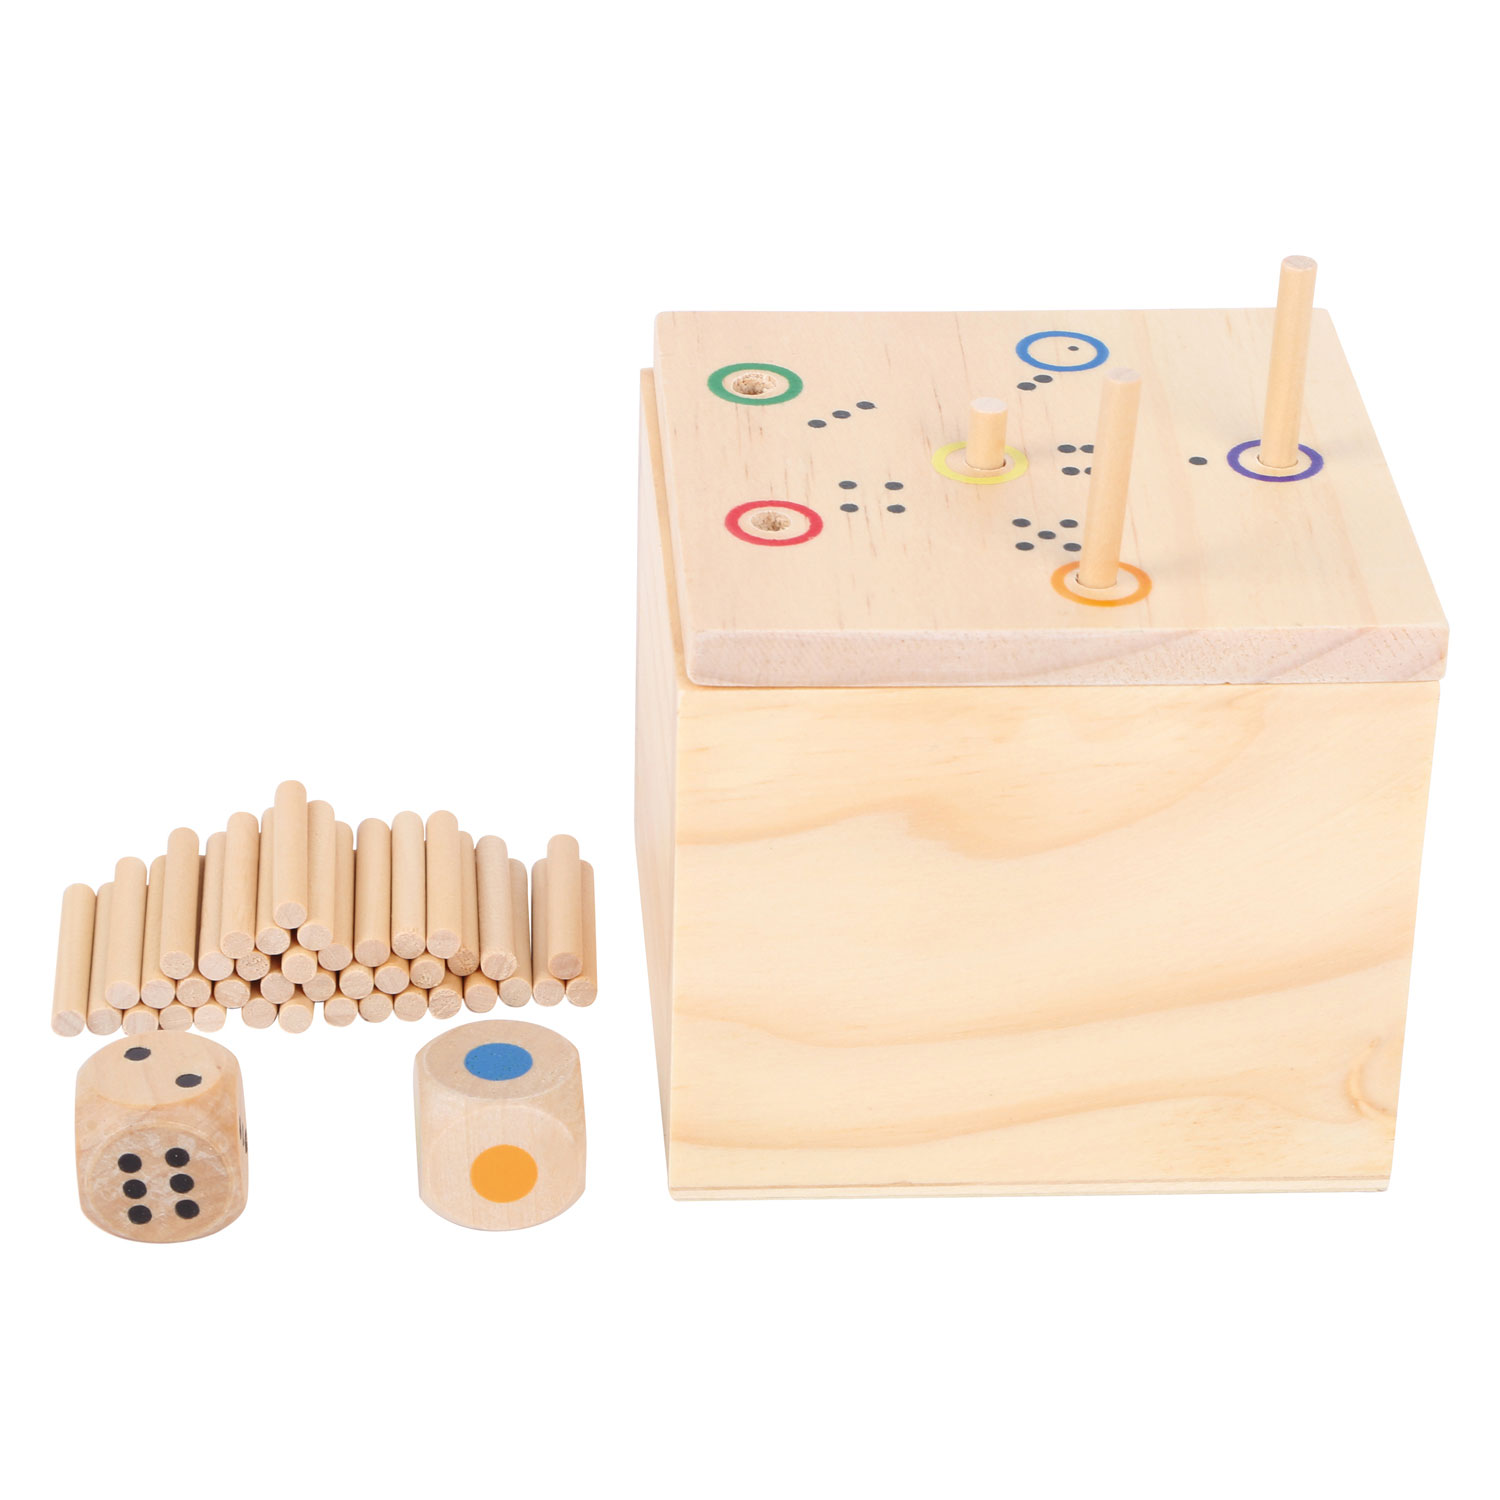 Small Foot - Dice Game In a Box 6 Out